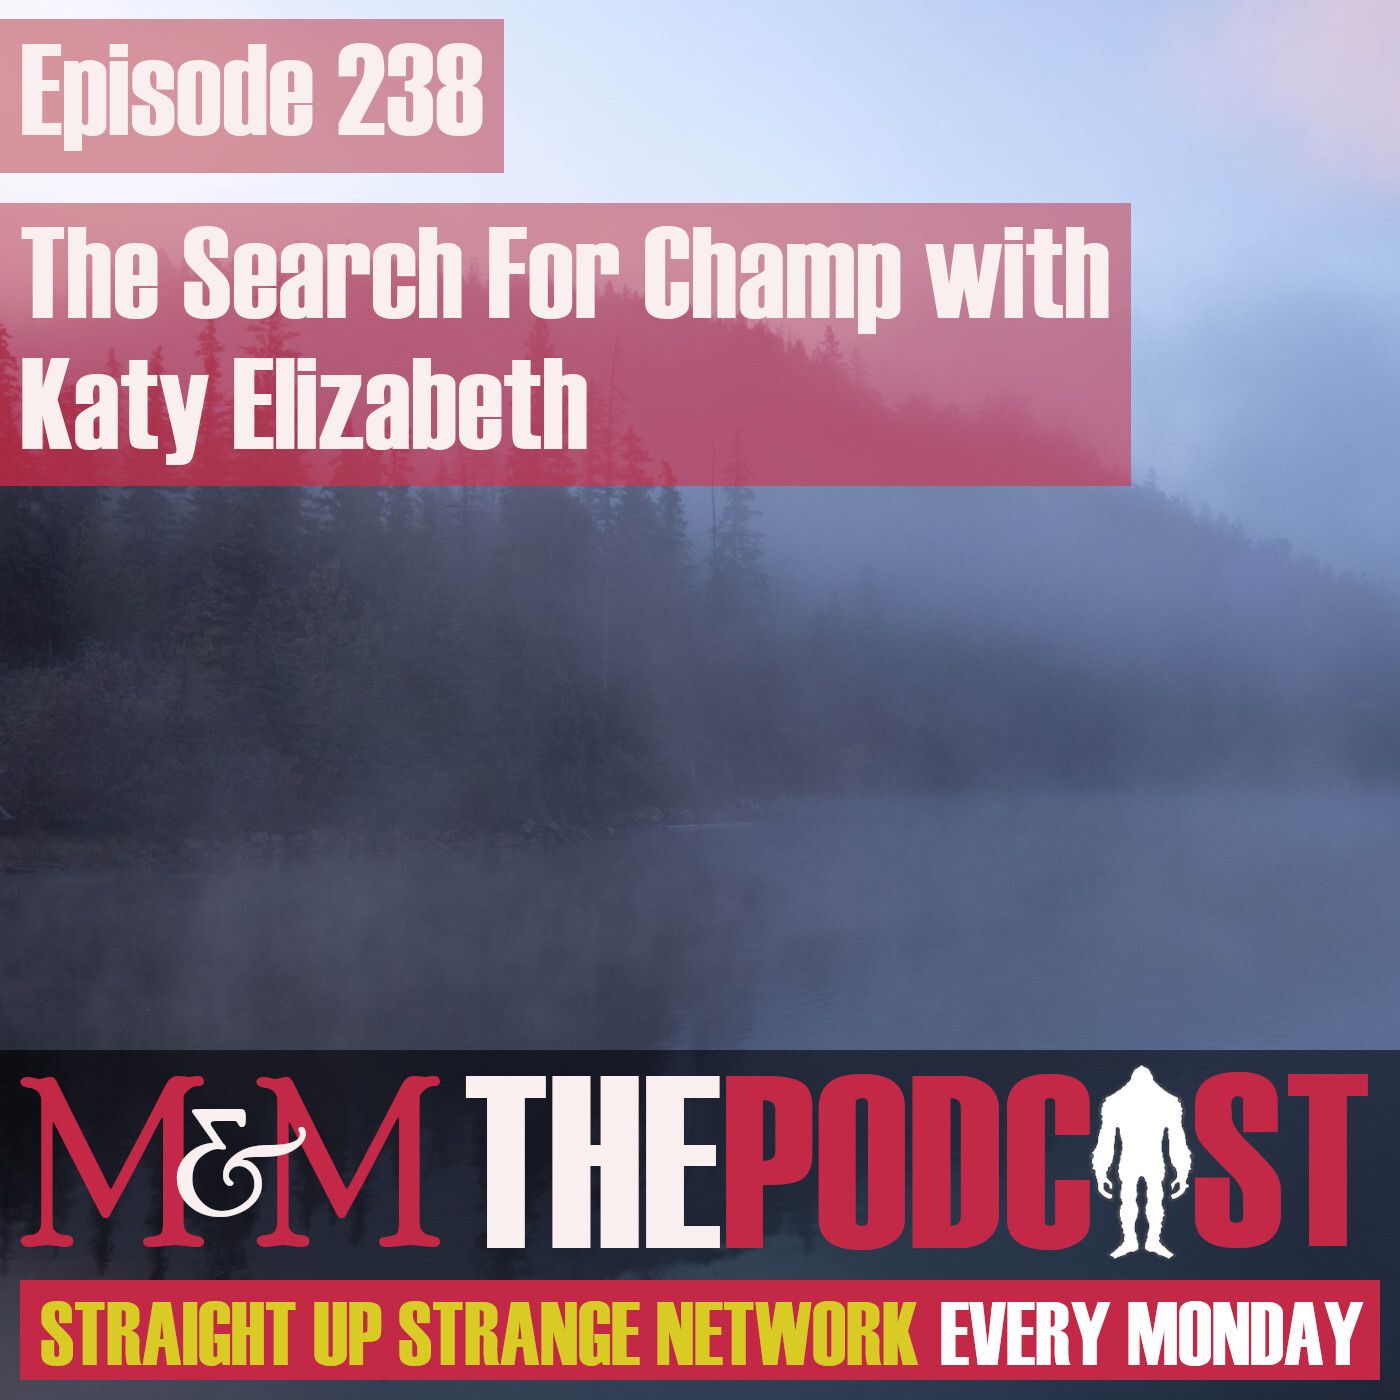 Mysteries and Monsters: Episode 238 The Search For Champ with Katy Elizabeth